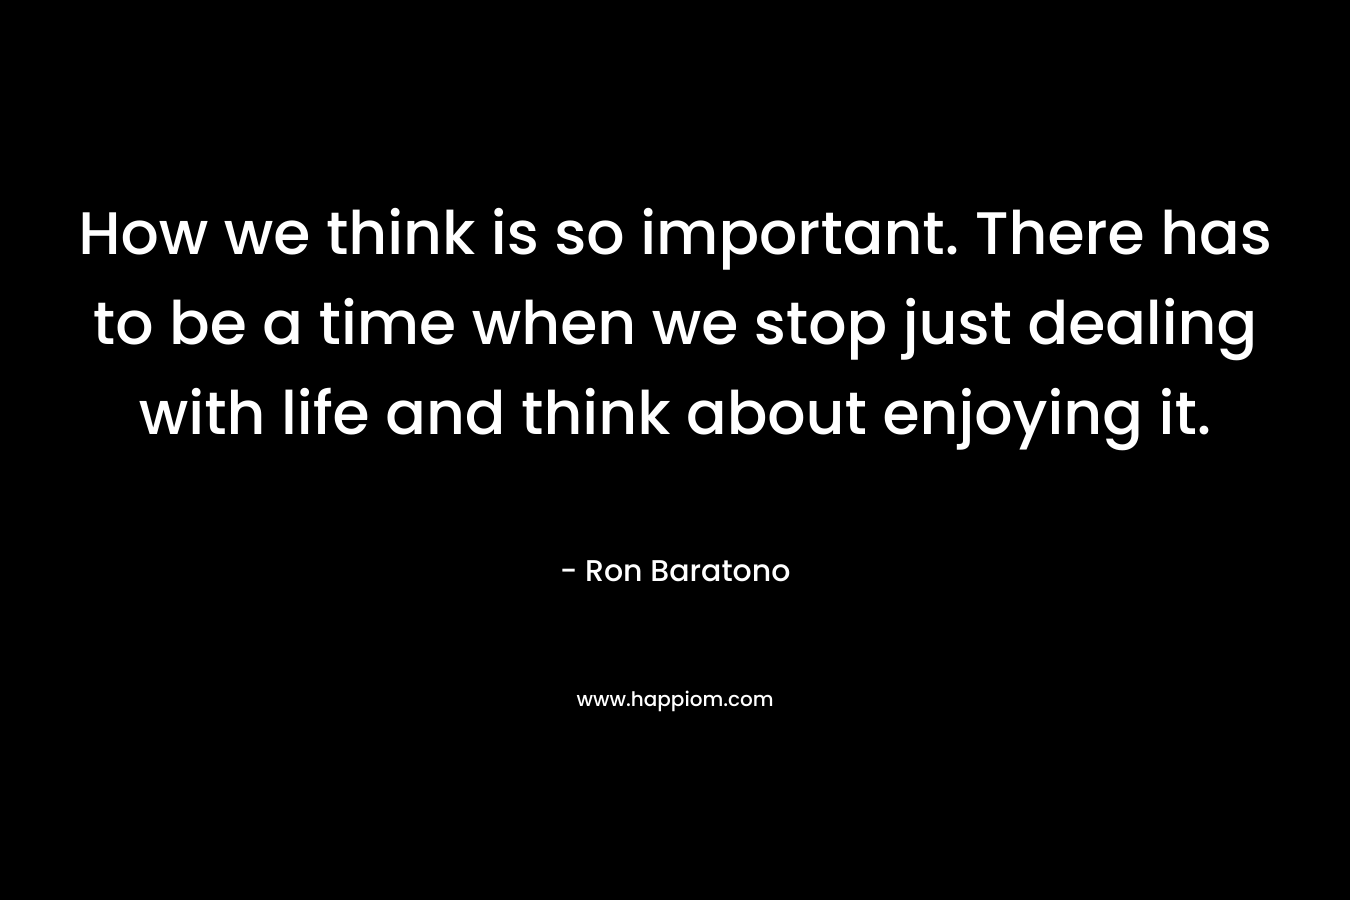 How we think is so important. There has to be a time when we stop just dealing with life and think about enjoying it. – Ron Baratono